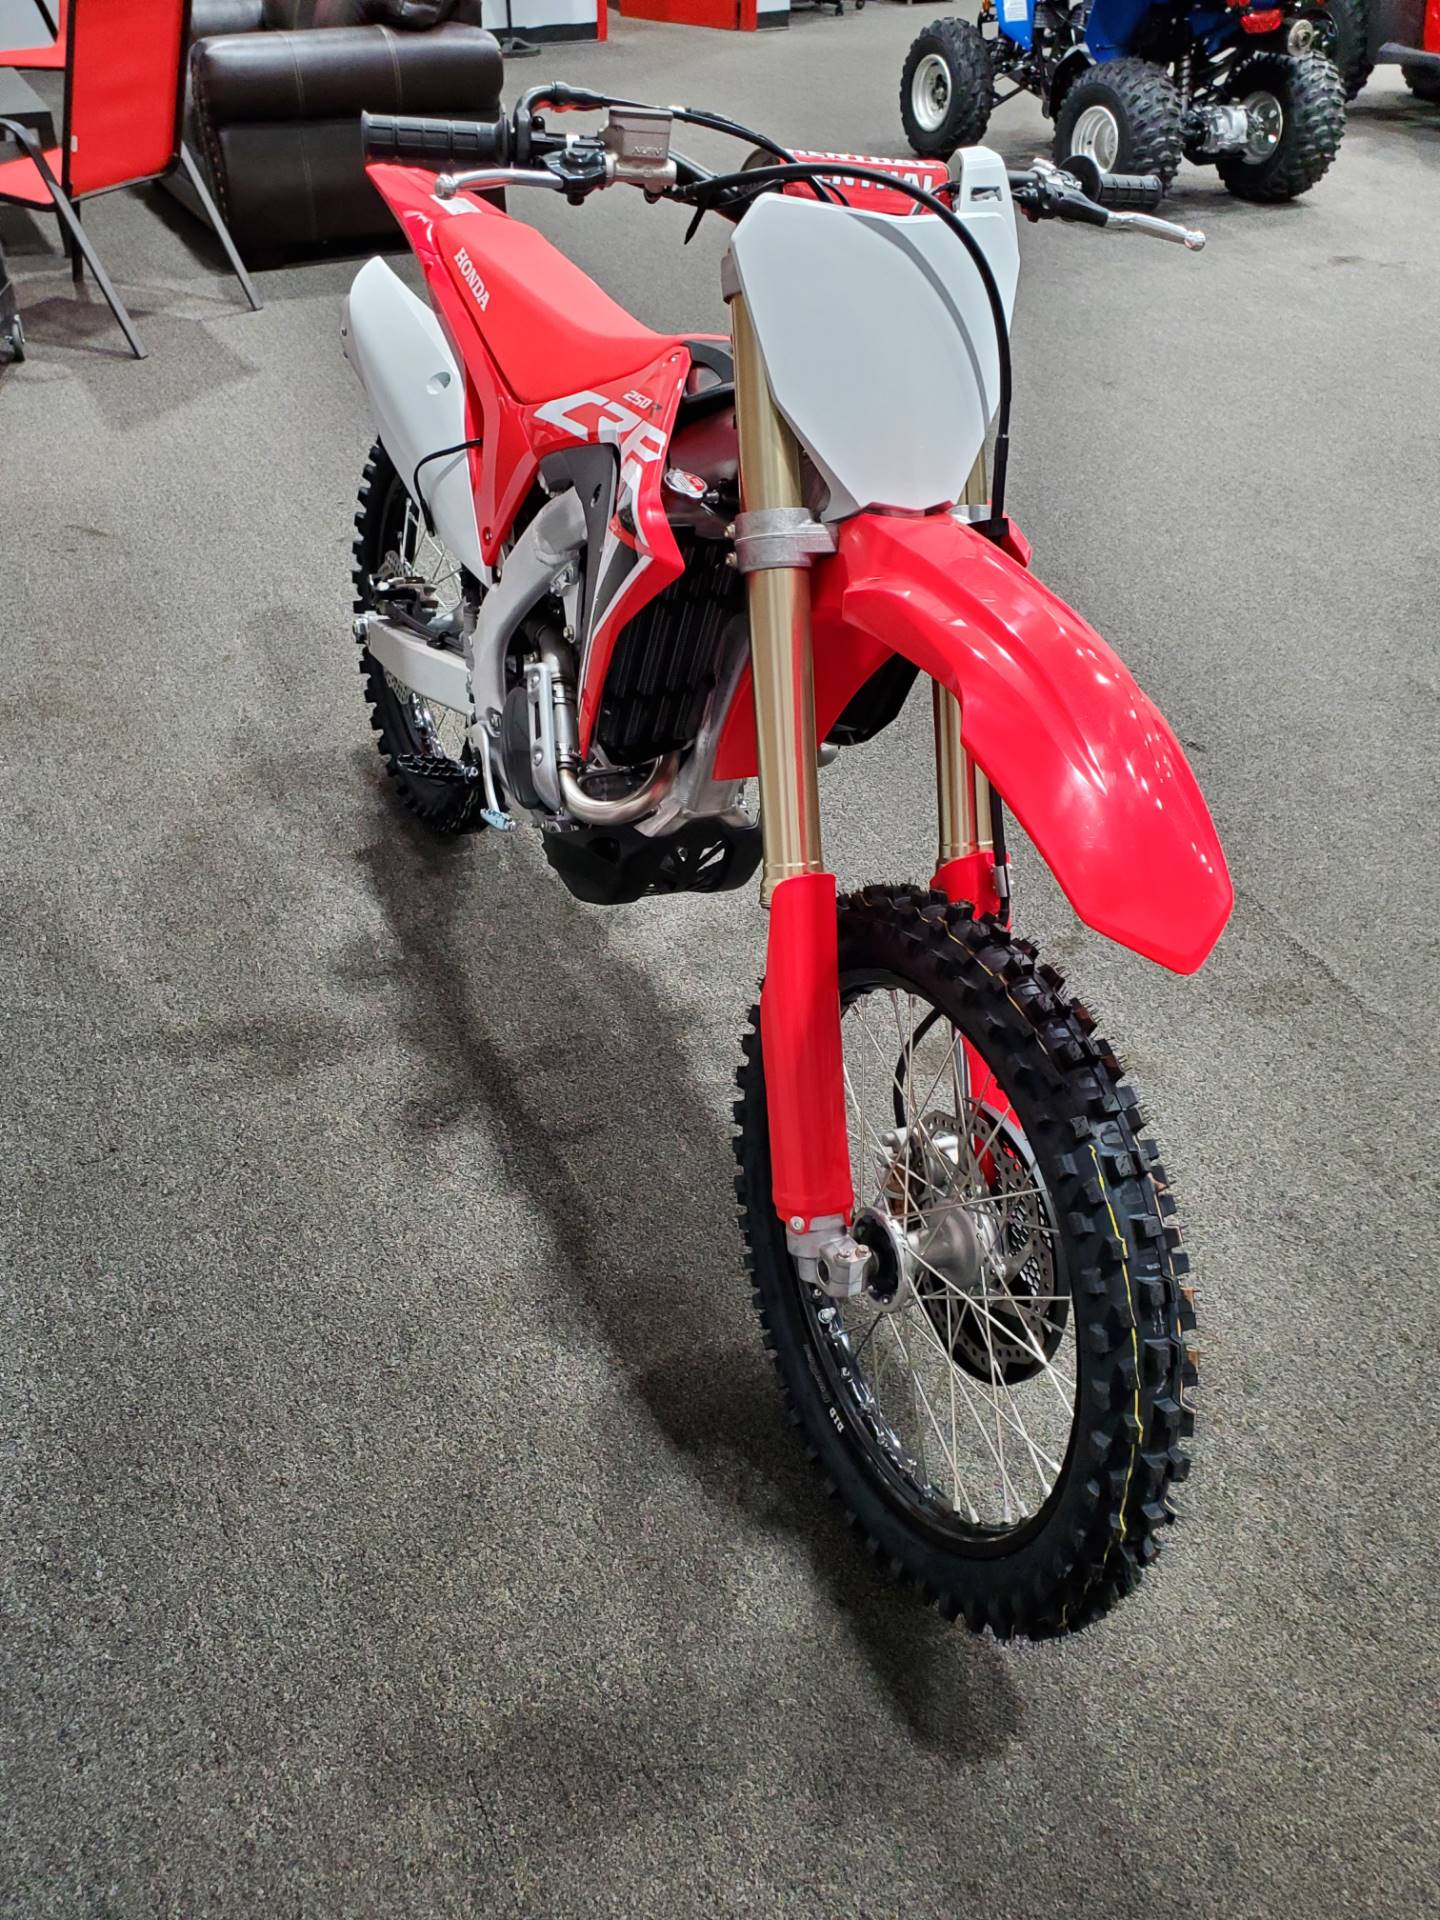 New 2021 Honda CRF250R Red Motorcycles in Moon Township PA 301865